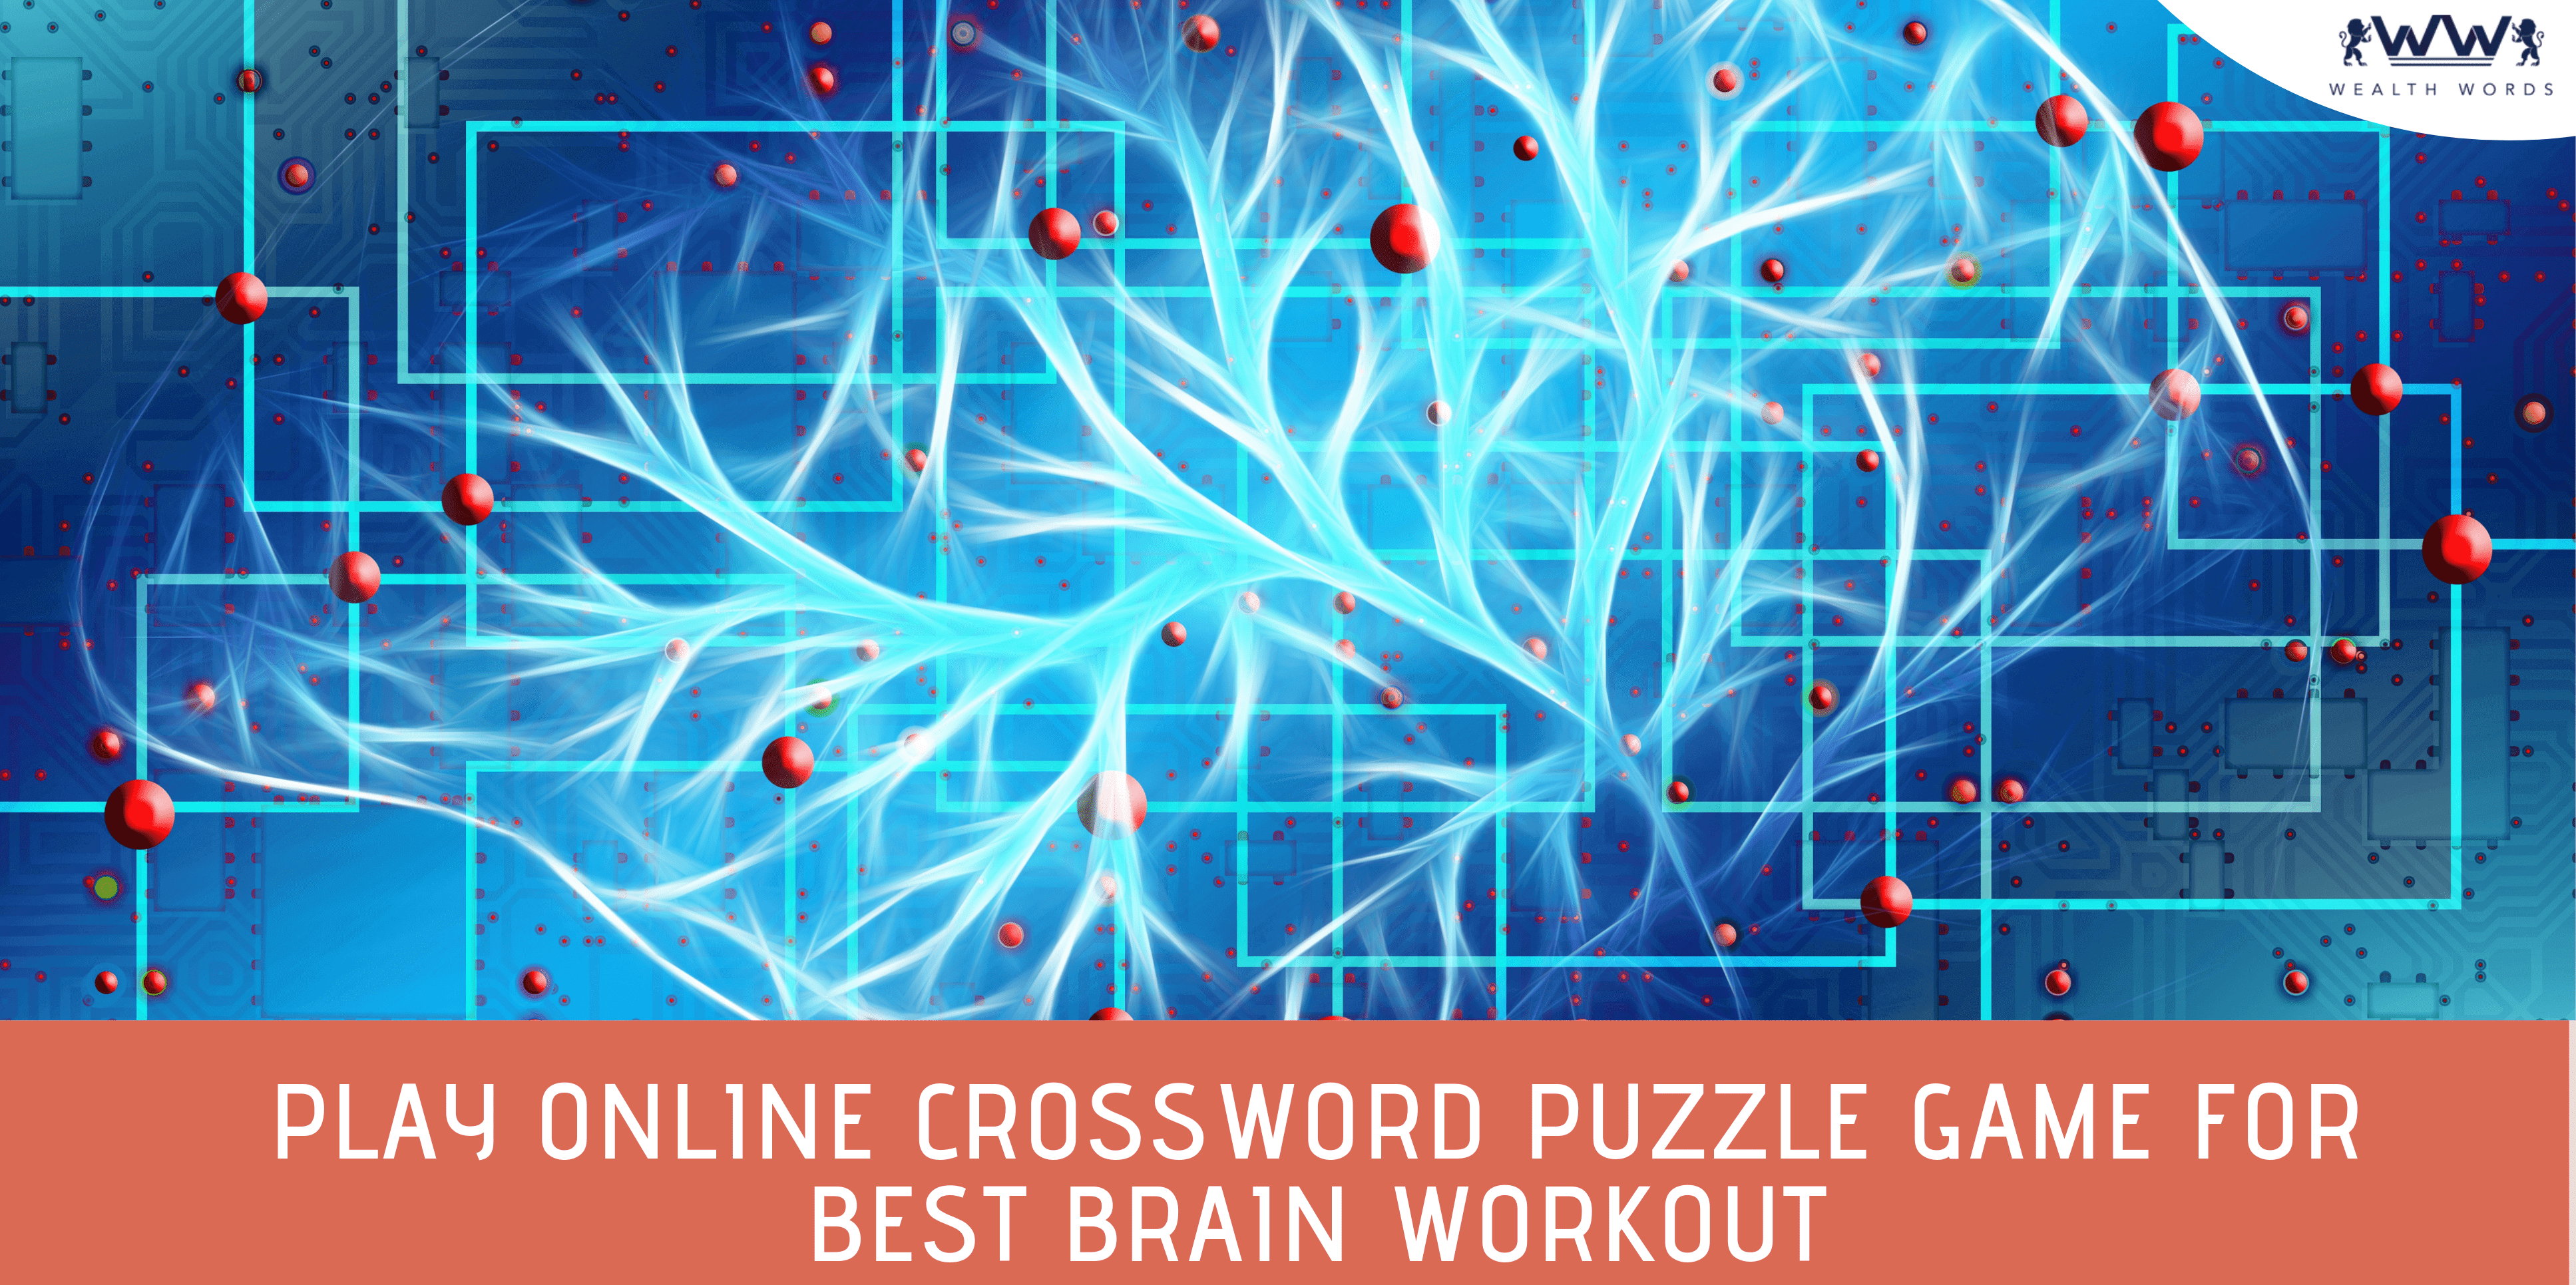 Play Online Crossword Puzzle Game For Best Brain Workout